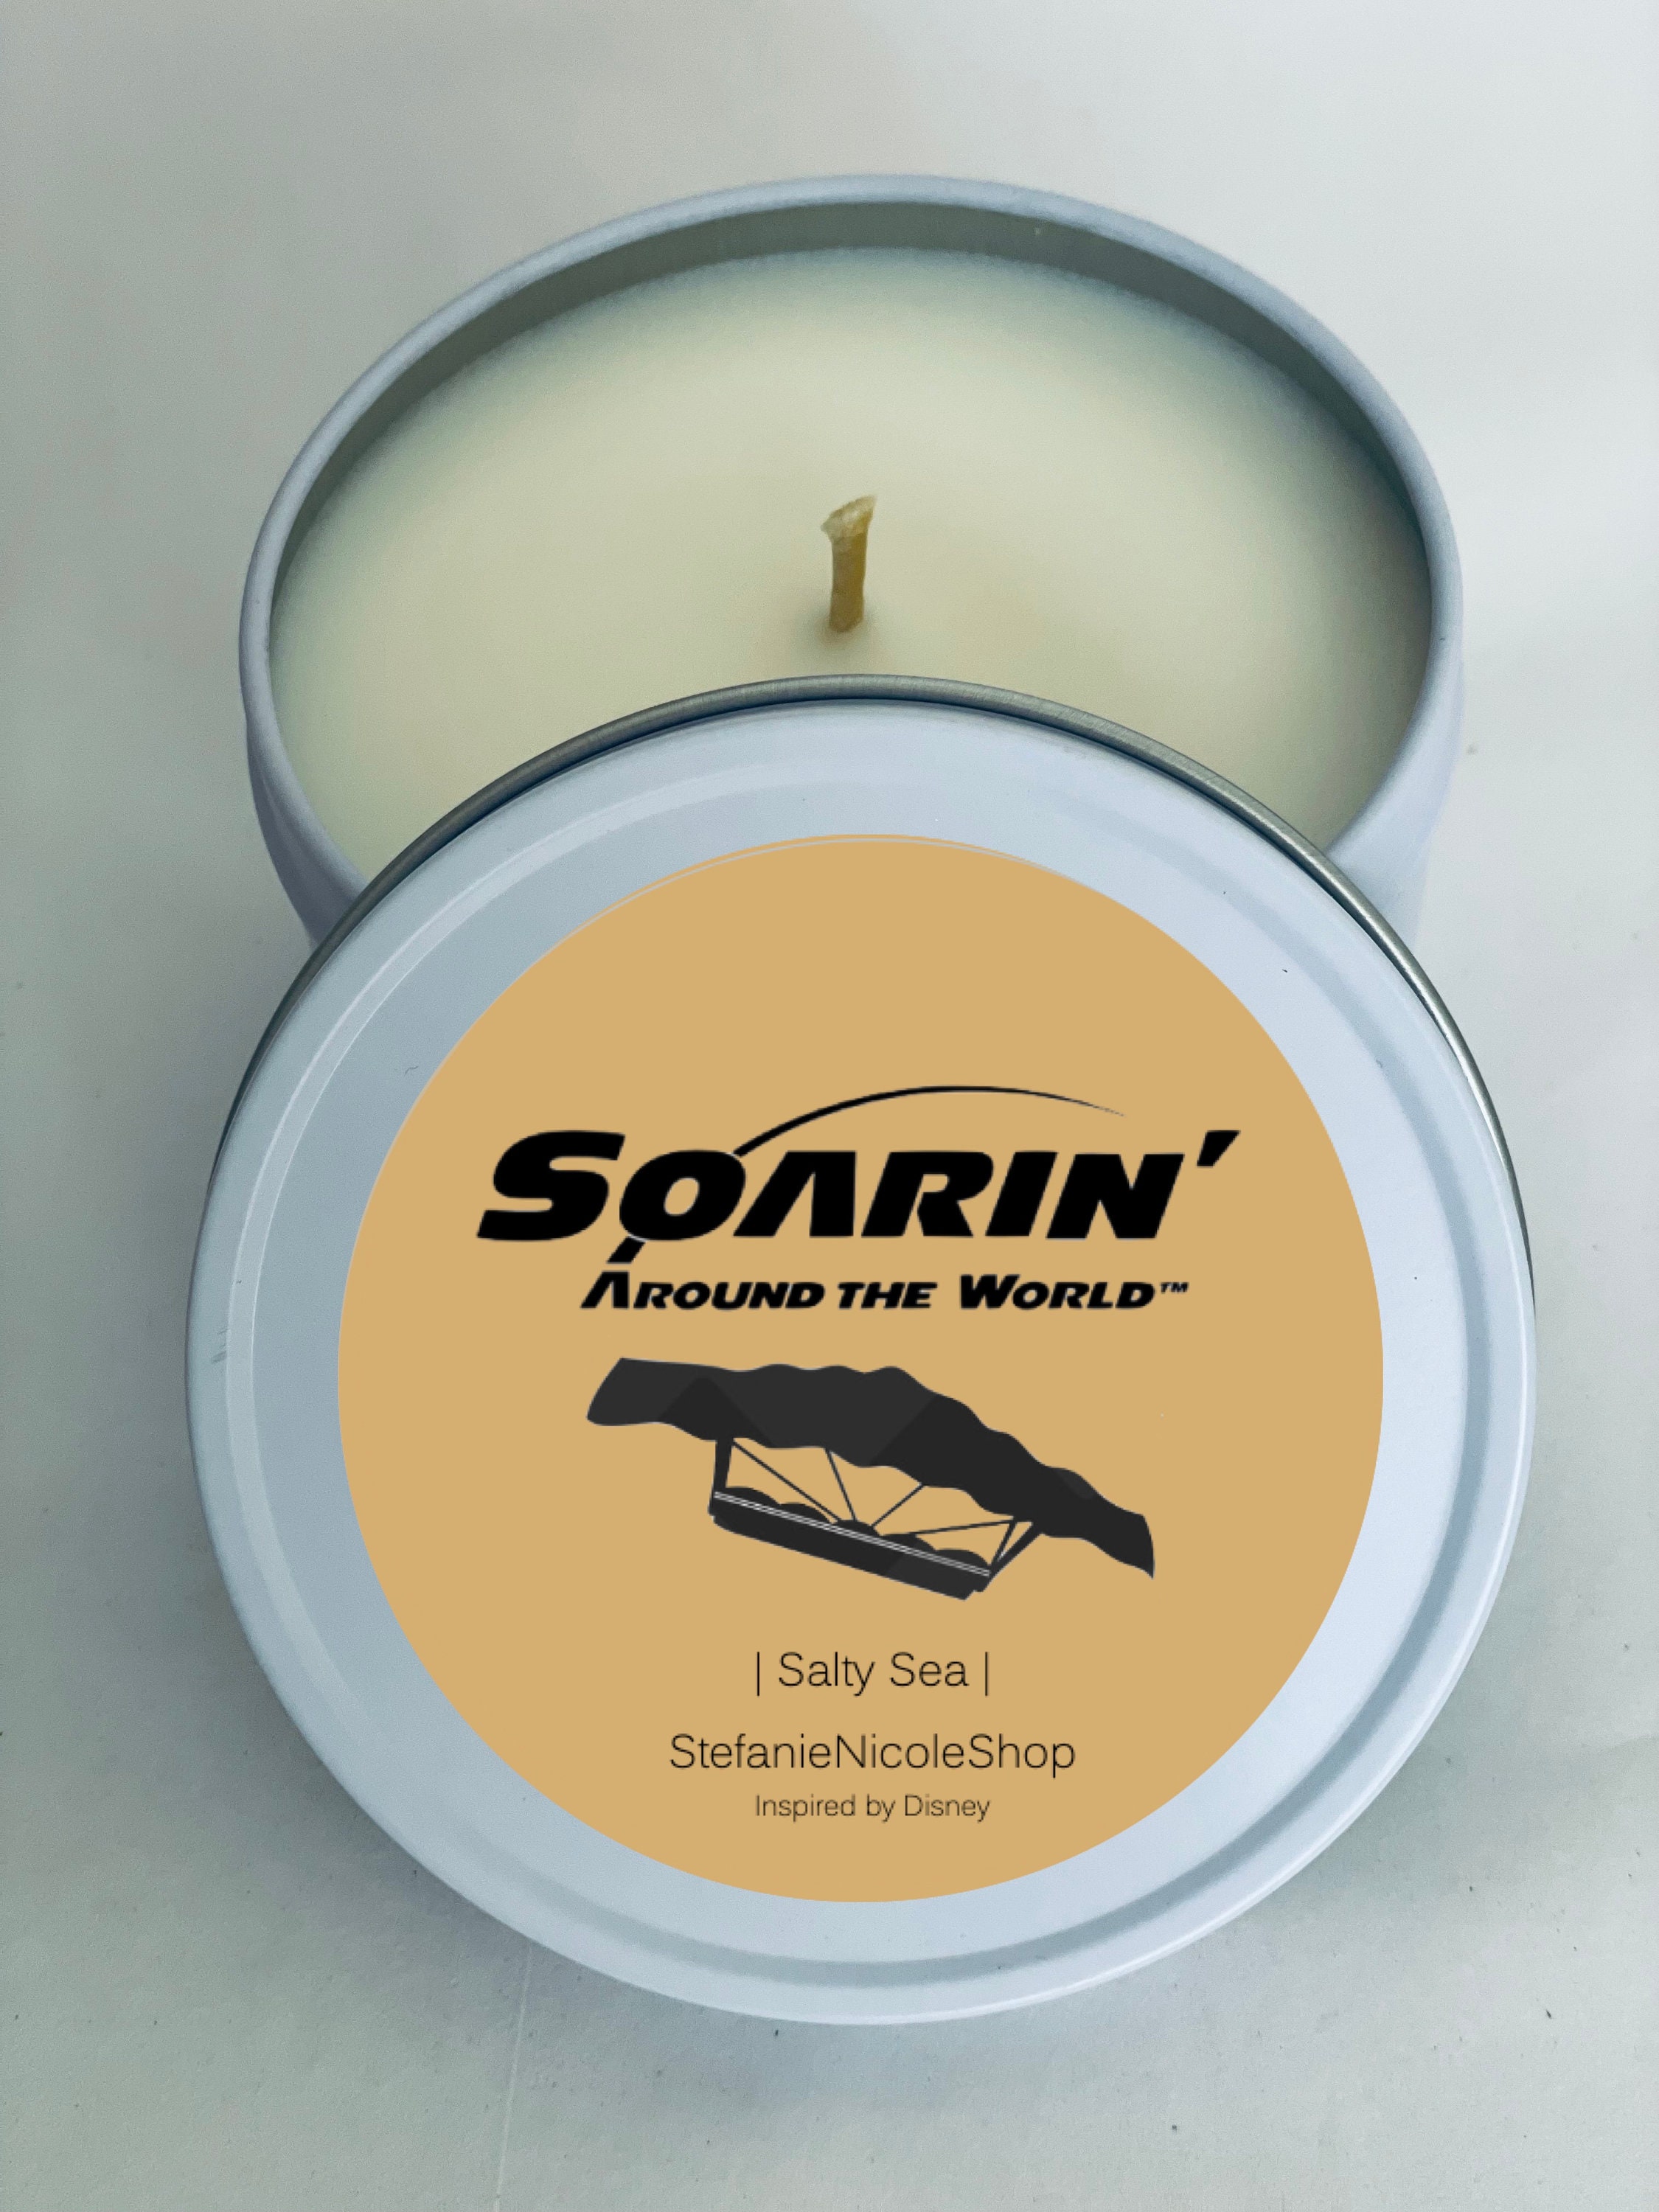 SOARIN\' OVER THE SEA (Ocean Breeze) candles and home fragrance products